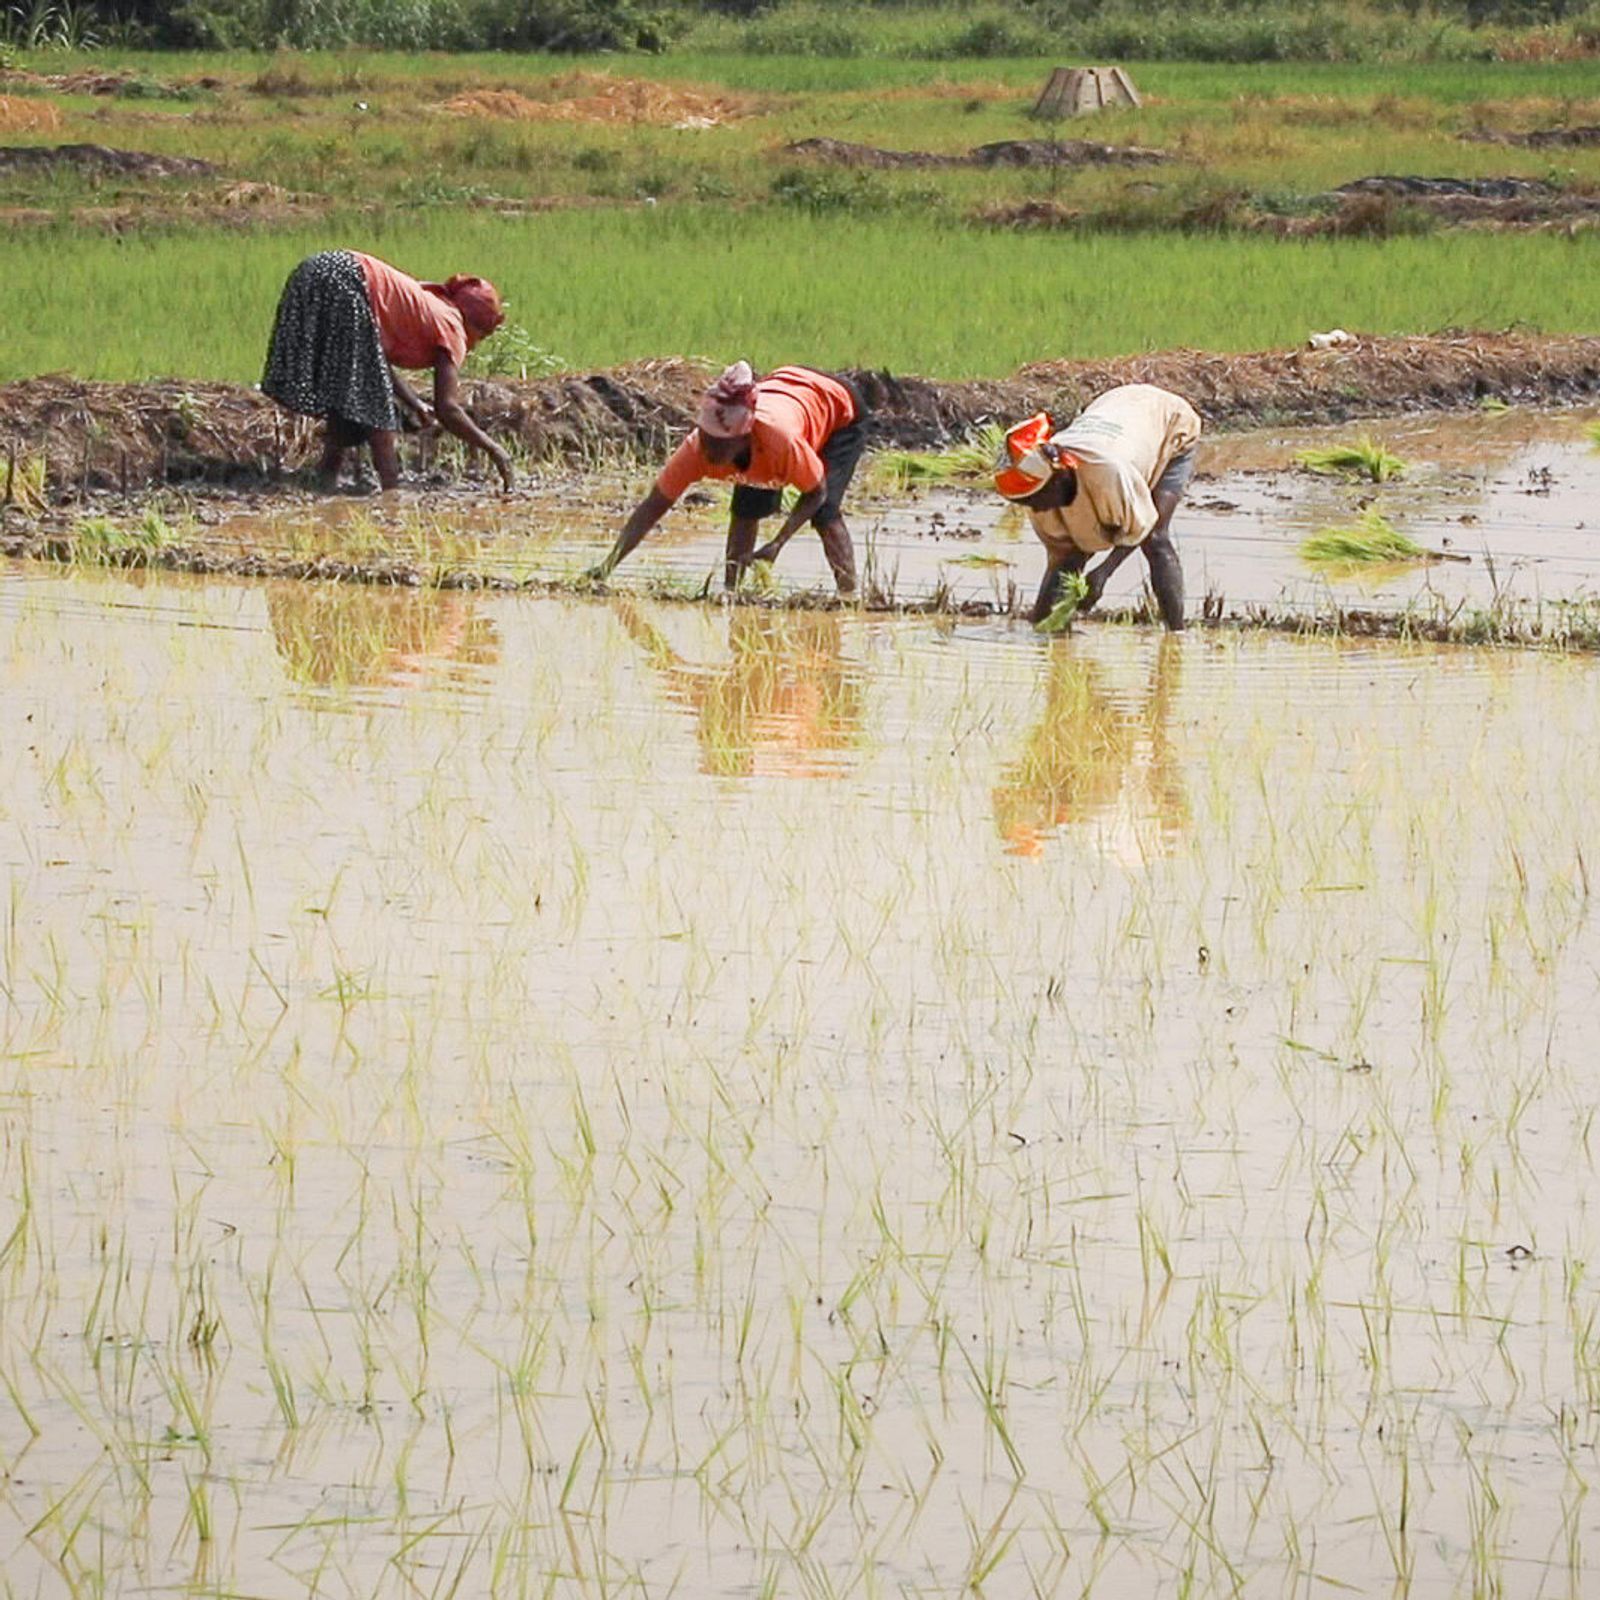 The paddy rice that COMACO sources comes from a large number of farms that grow it under a variety of conditions. 